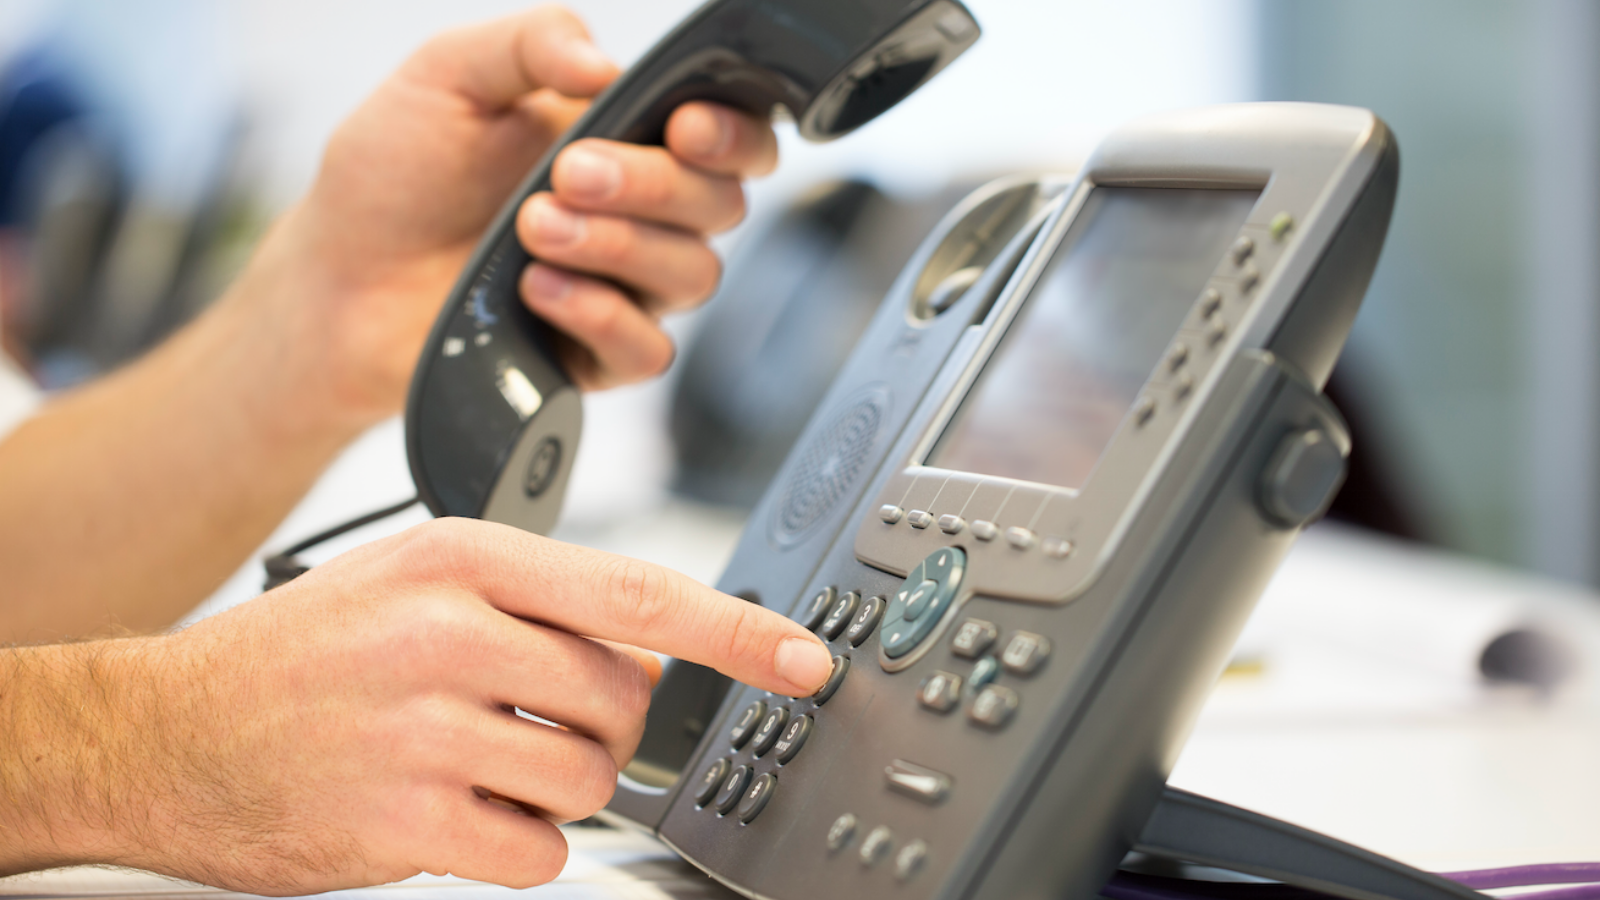 What Is a PBX Phone System, and How Does It Work?